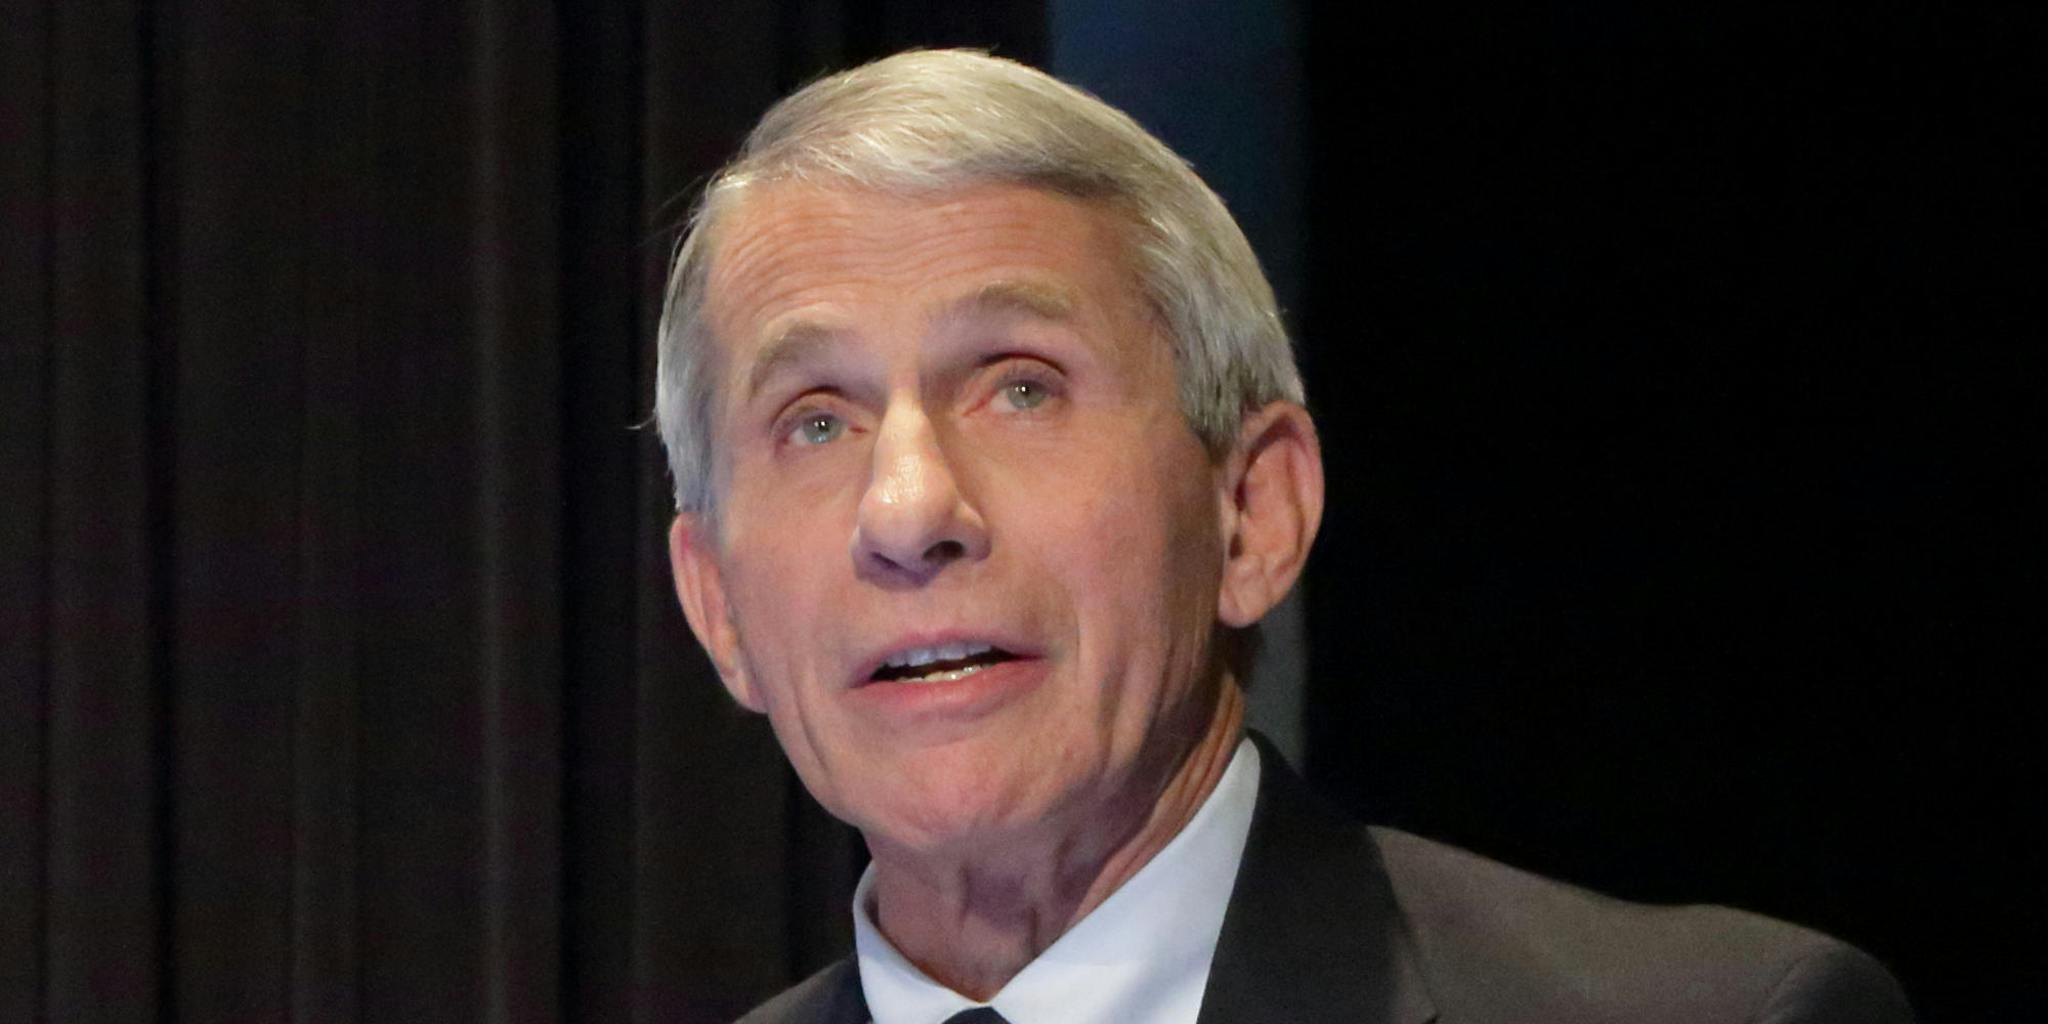 Anti-vaxxers will host a simulated ‘grand jury trial’ of Dr. Fauci for 5 days. For $10,000, you can be a ‘VIP juror’